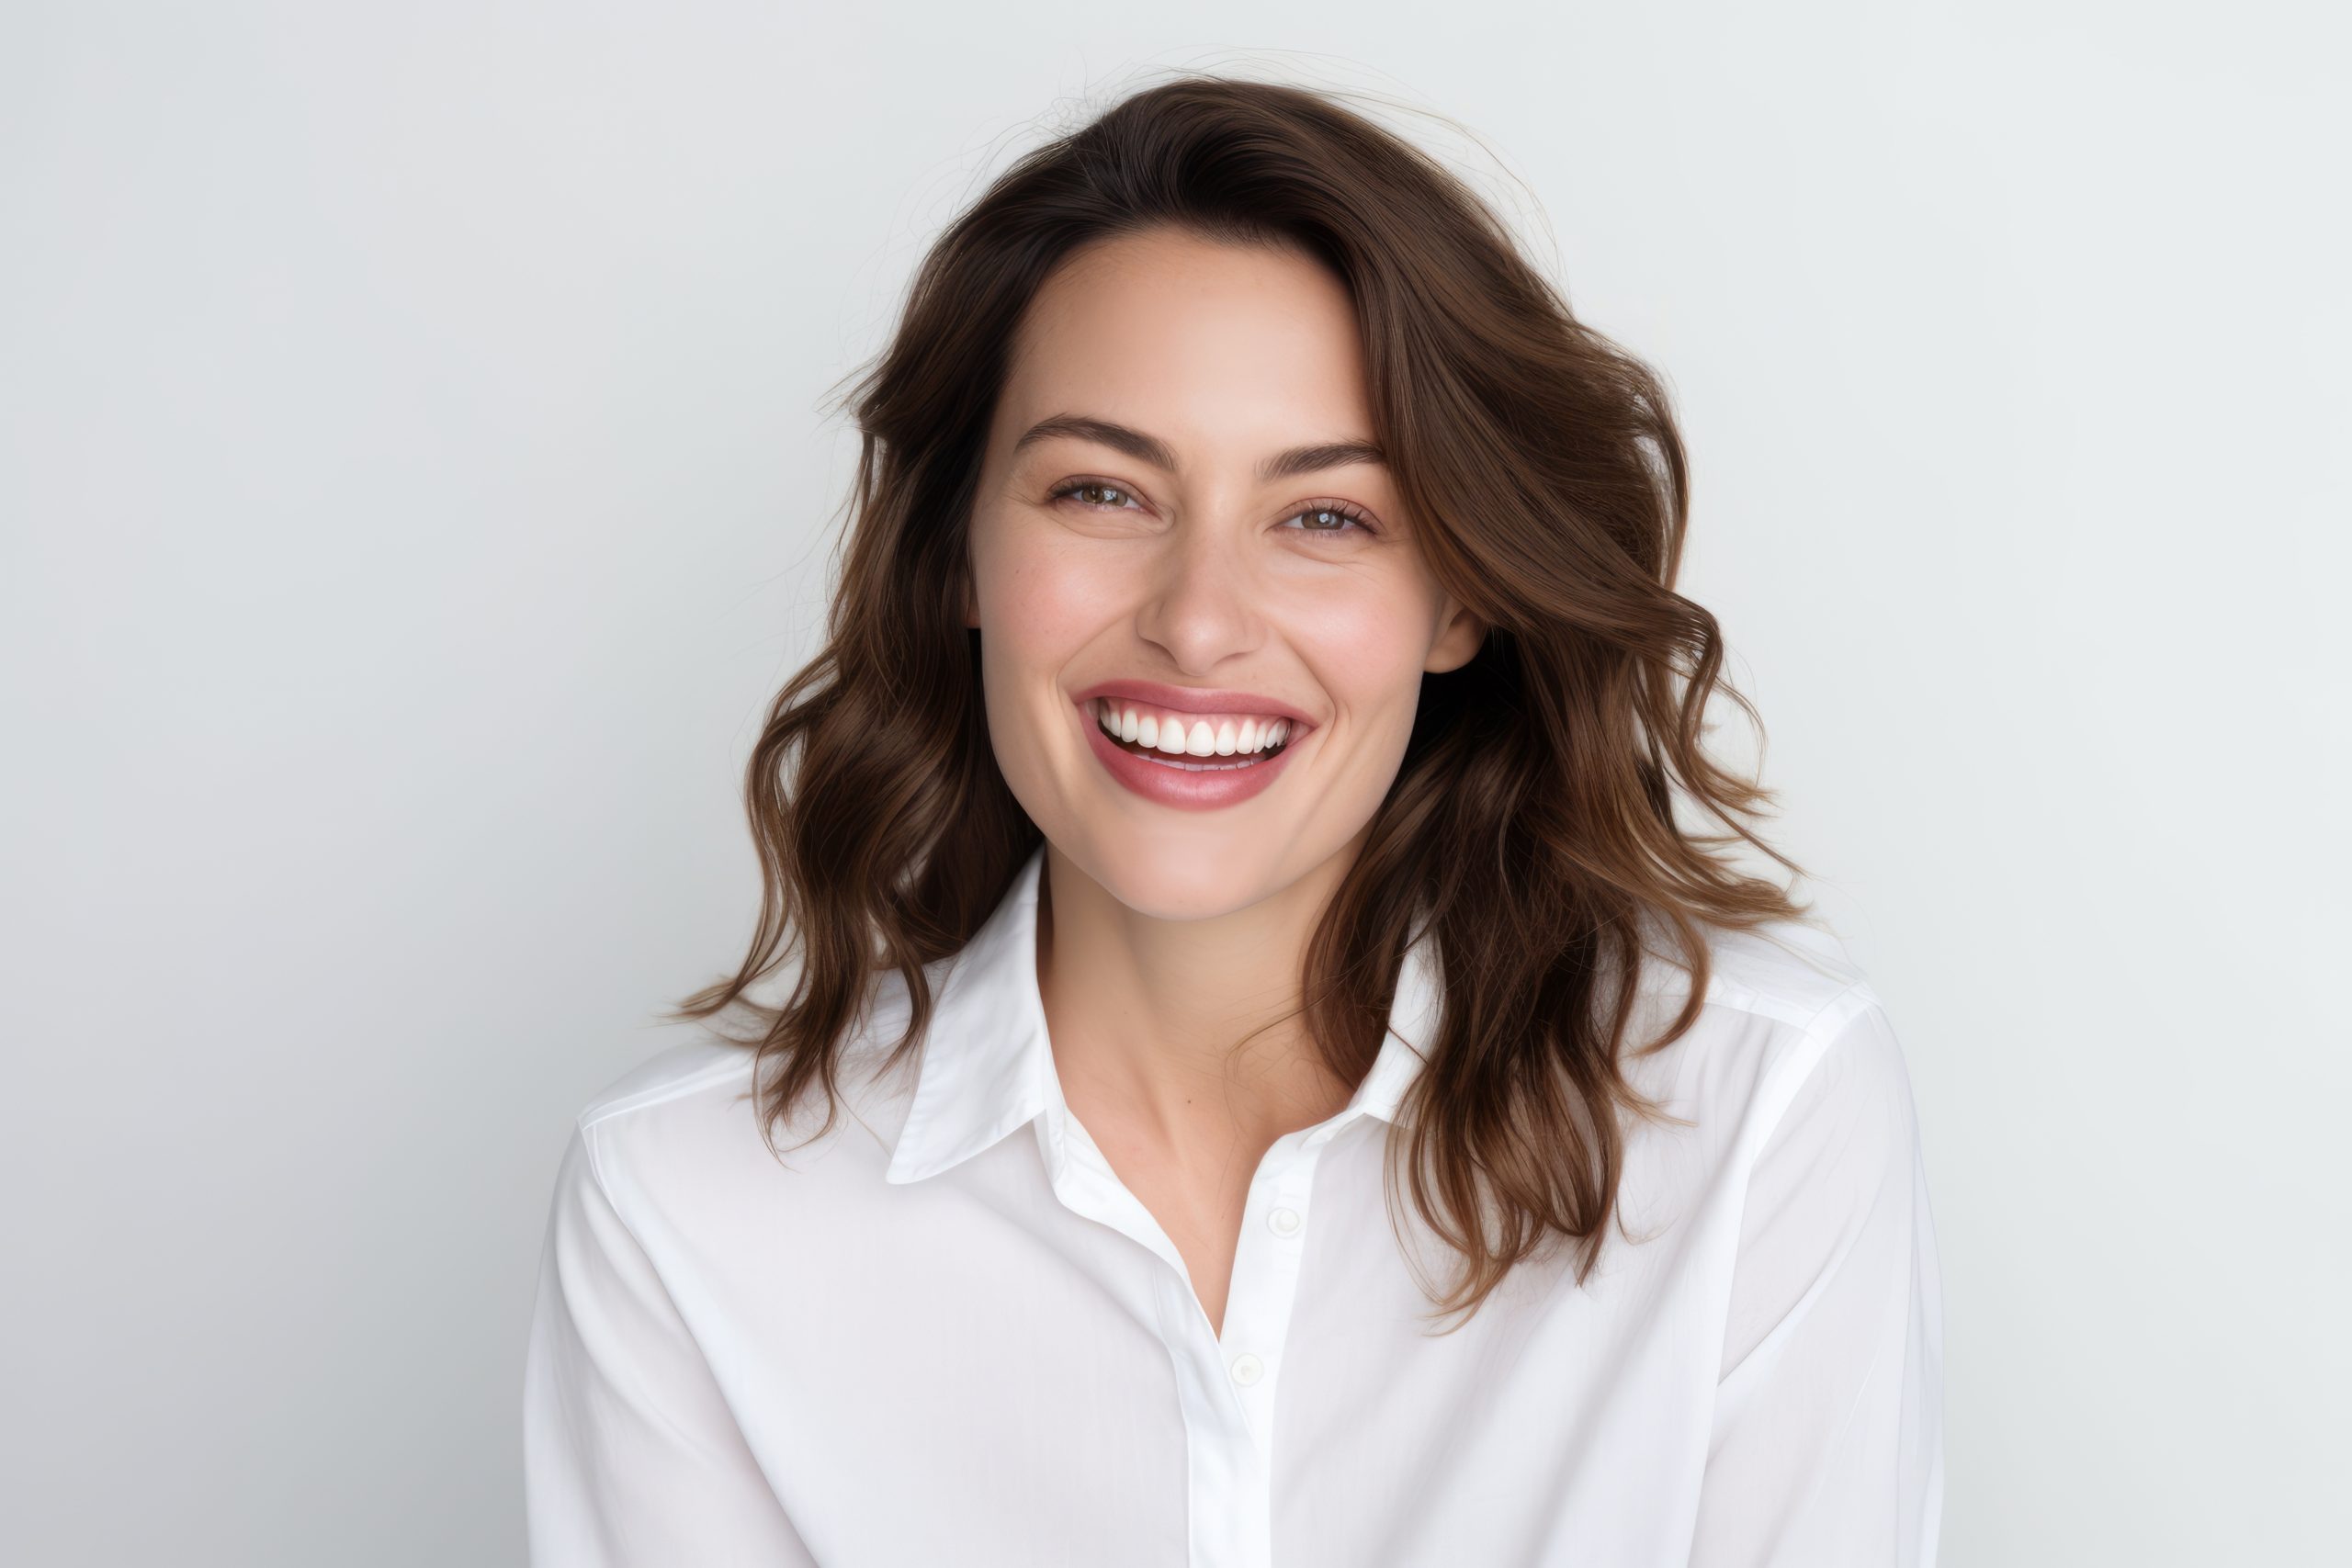 A radiant woman with a joyful smile, recognized as a Sexual Health Expert in Los Angeles, wears a crisp white shirt against a clean, light background.